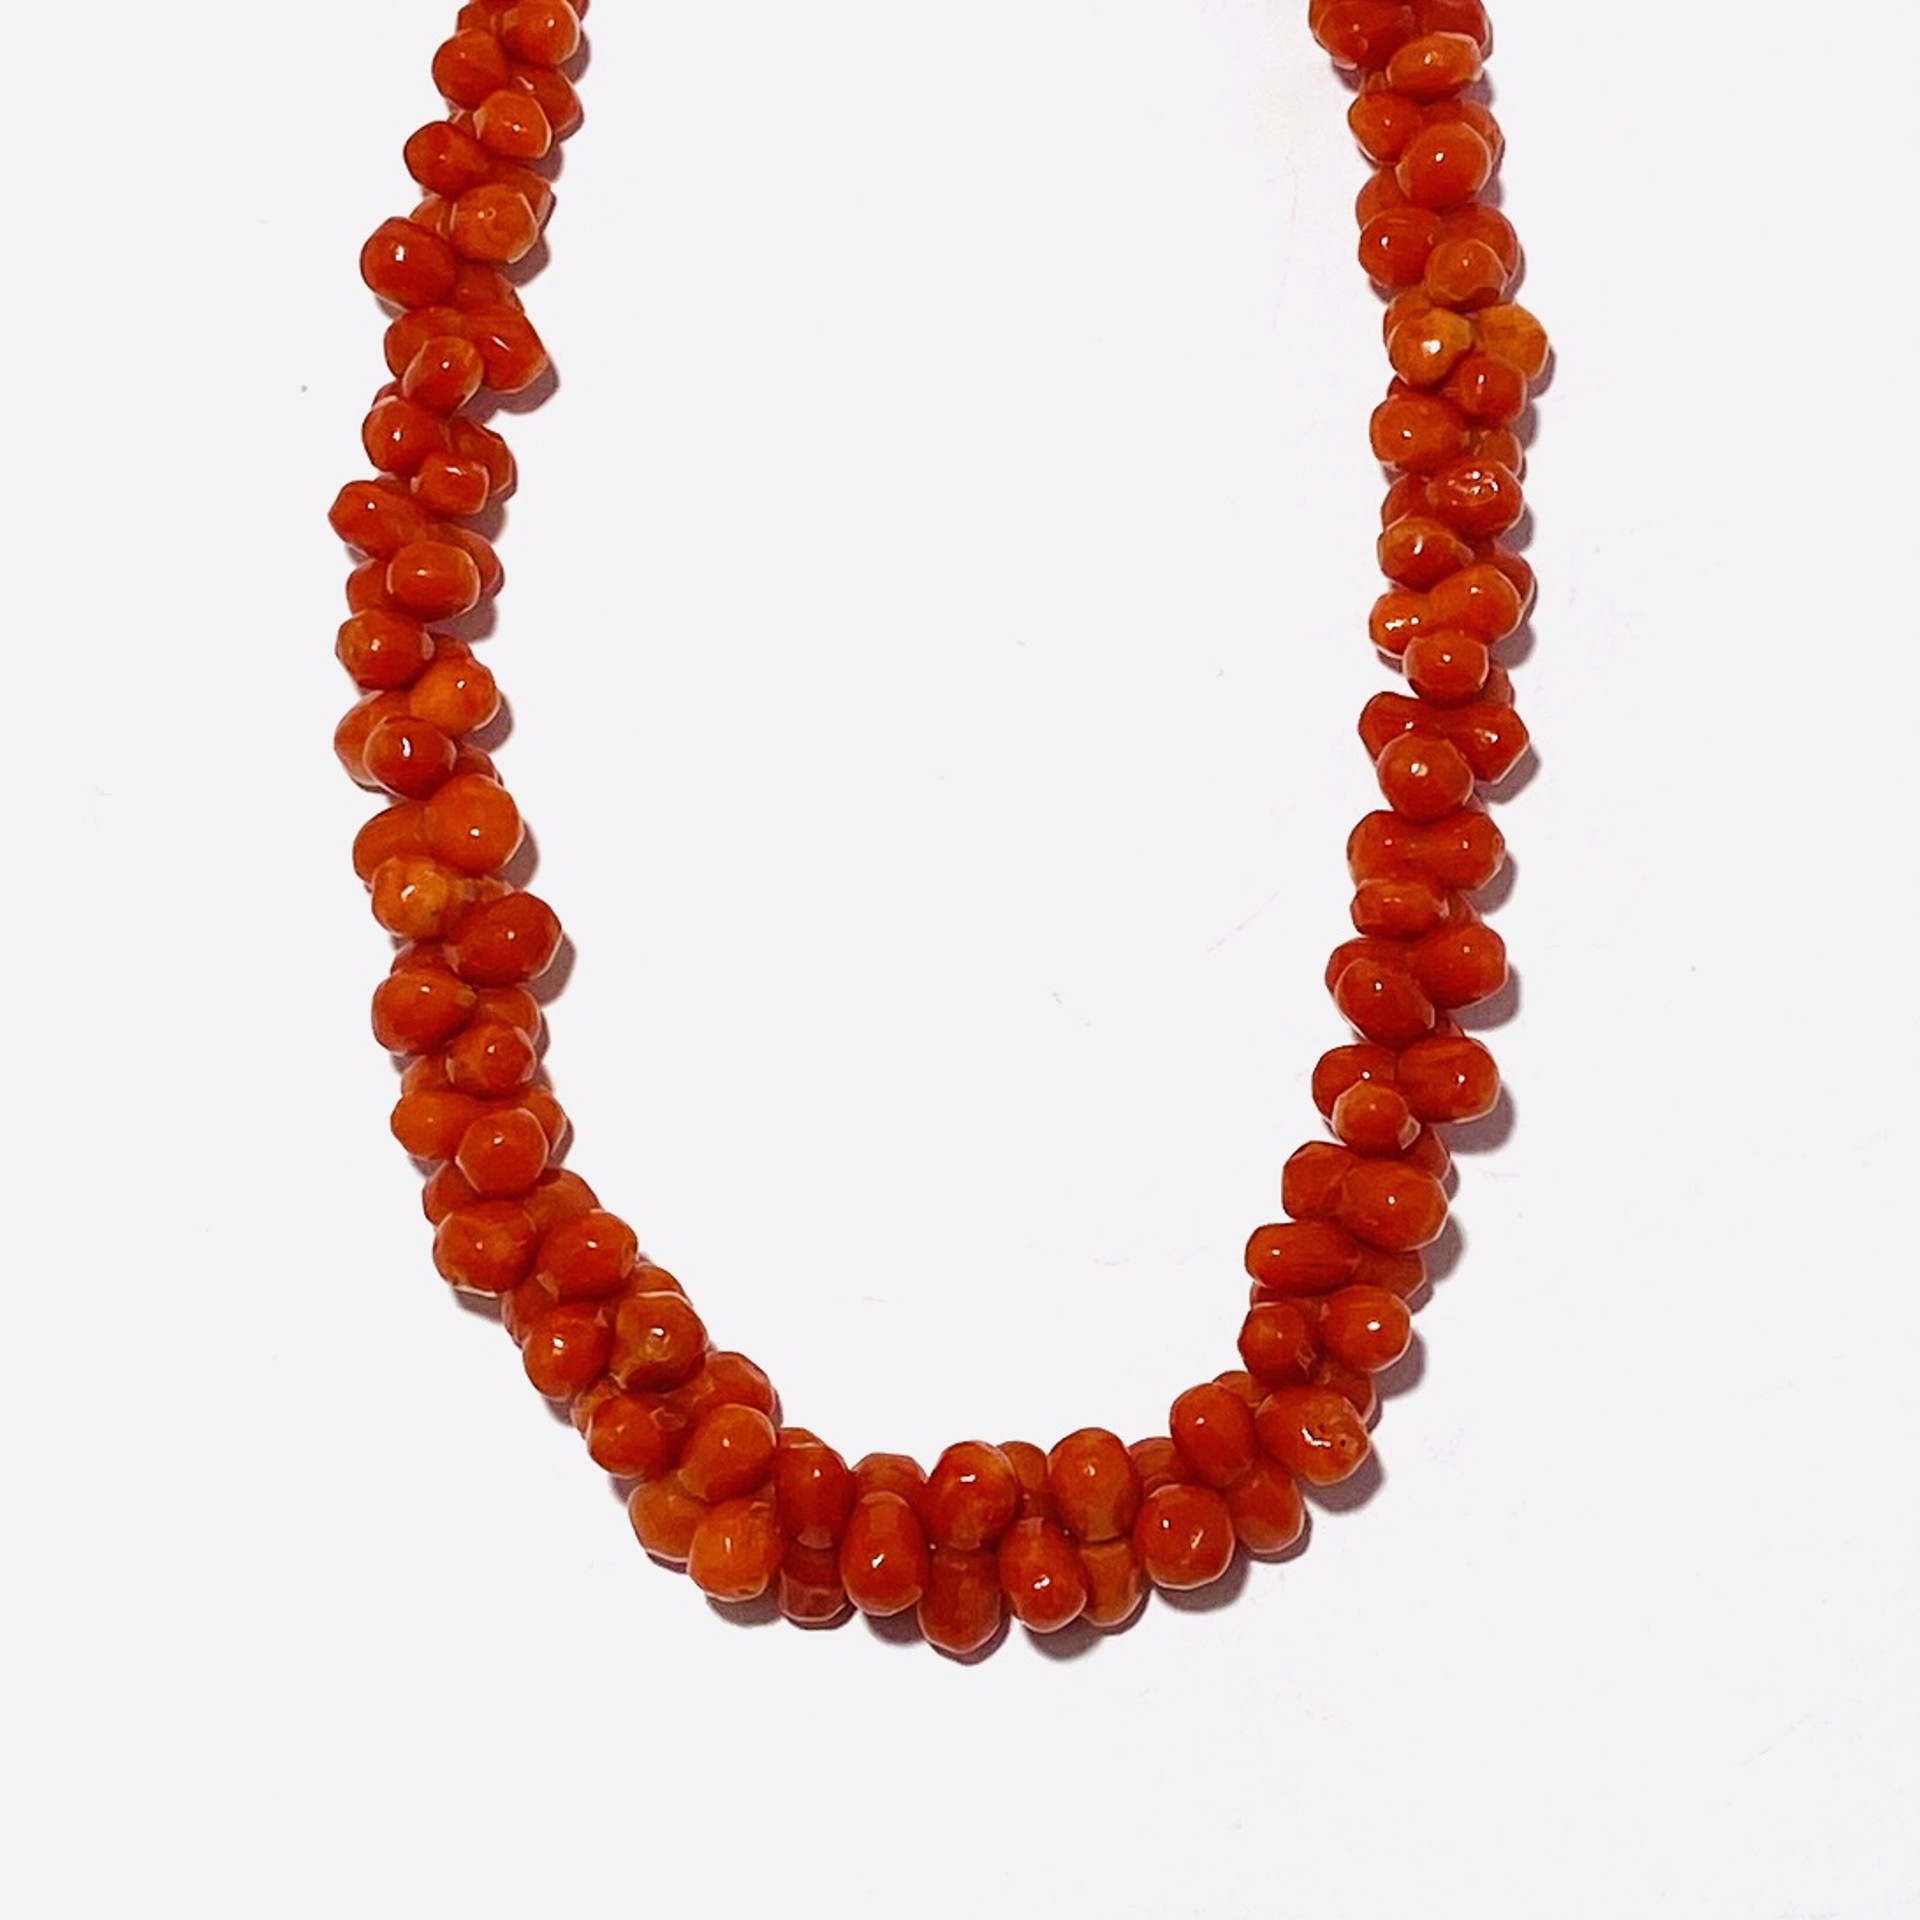 Double Strand Red Vintage Coral Necklace by Nance Trueworthy